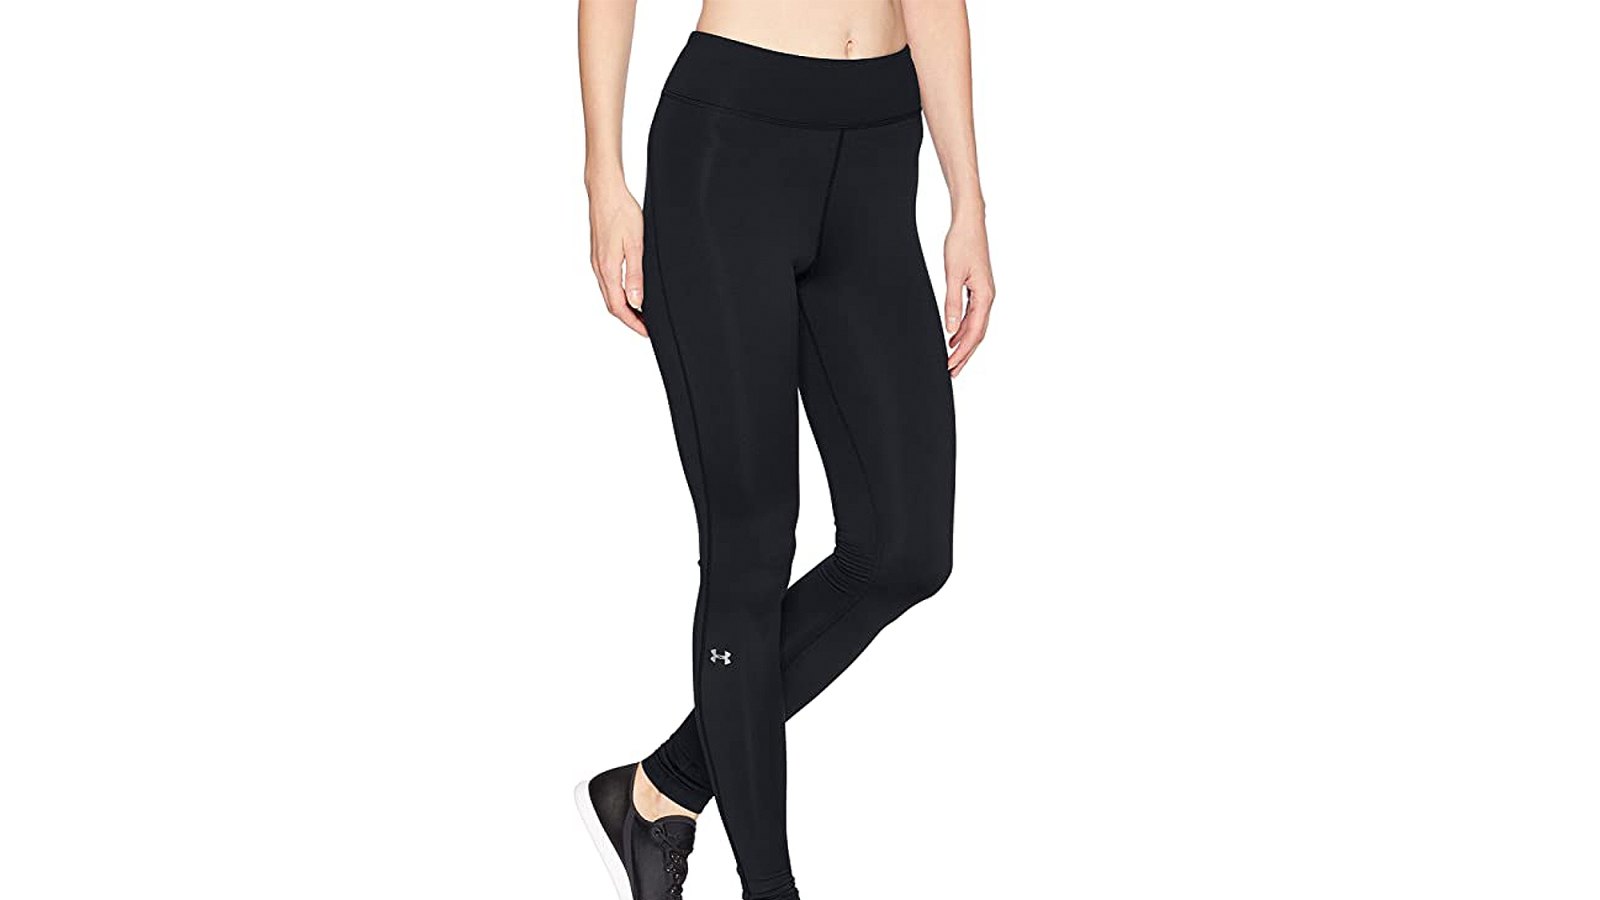 Under Armour Fleece-Lined Leggings Will Keep You Warm This Winter